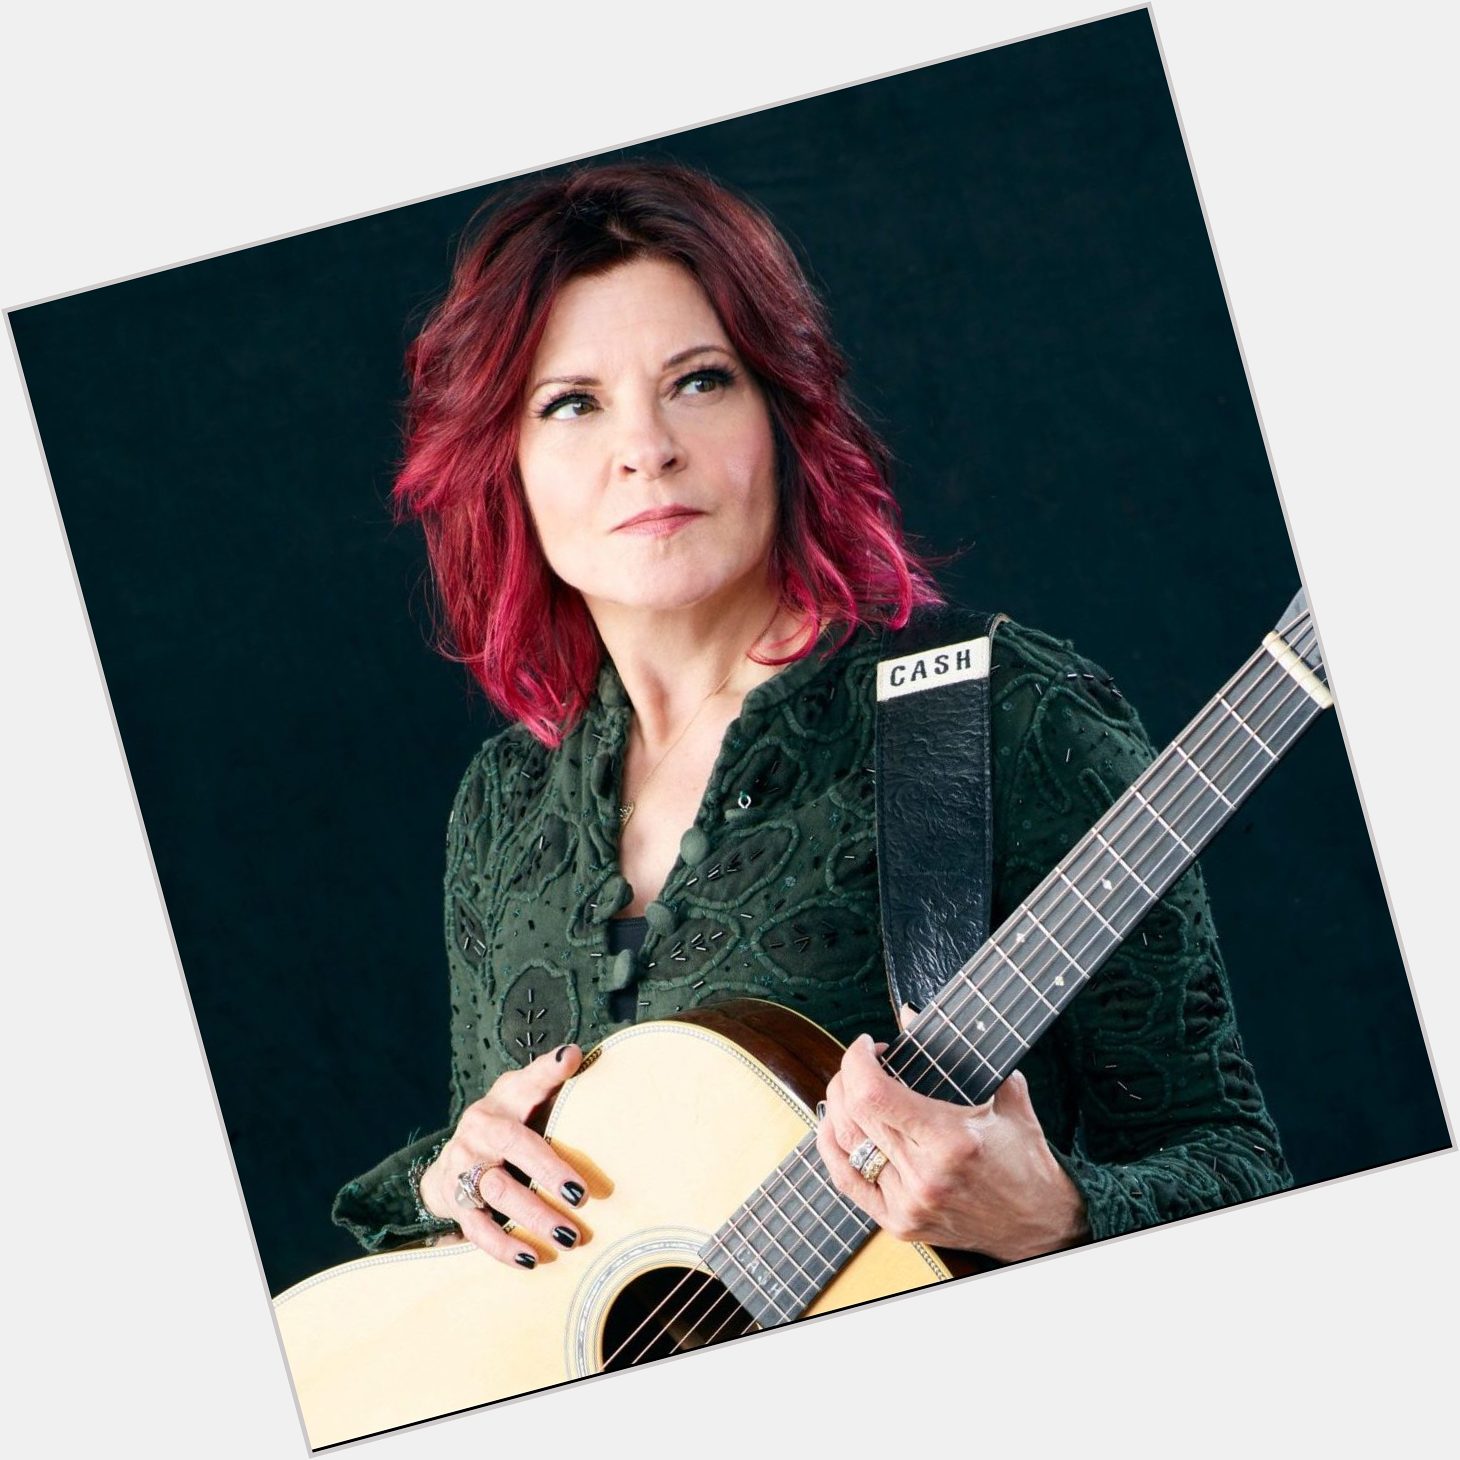 Please join me here at in wishing the one and only Rosanne Cash a very Happy Birthday today  